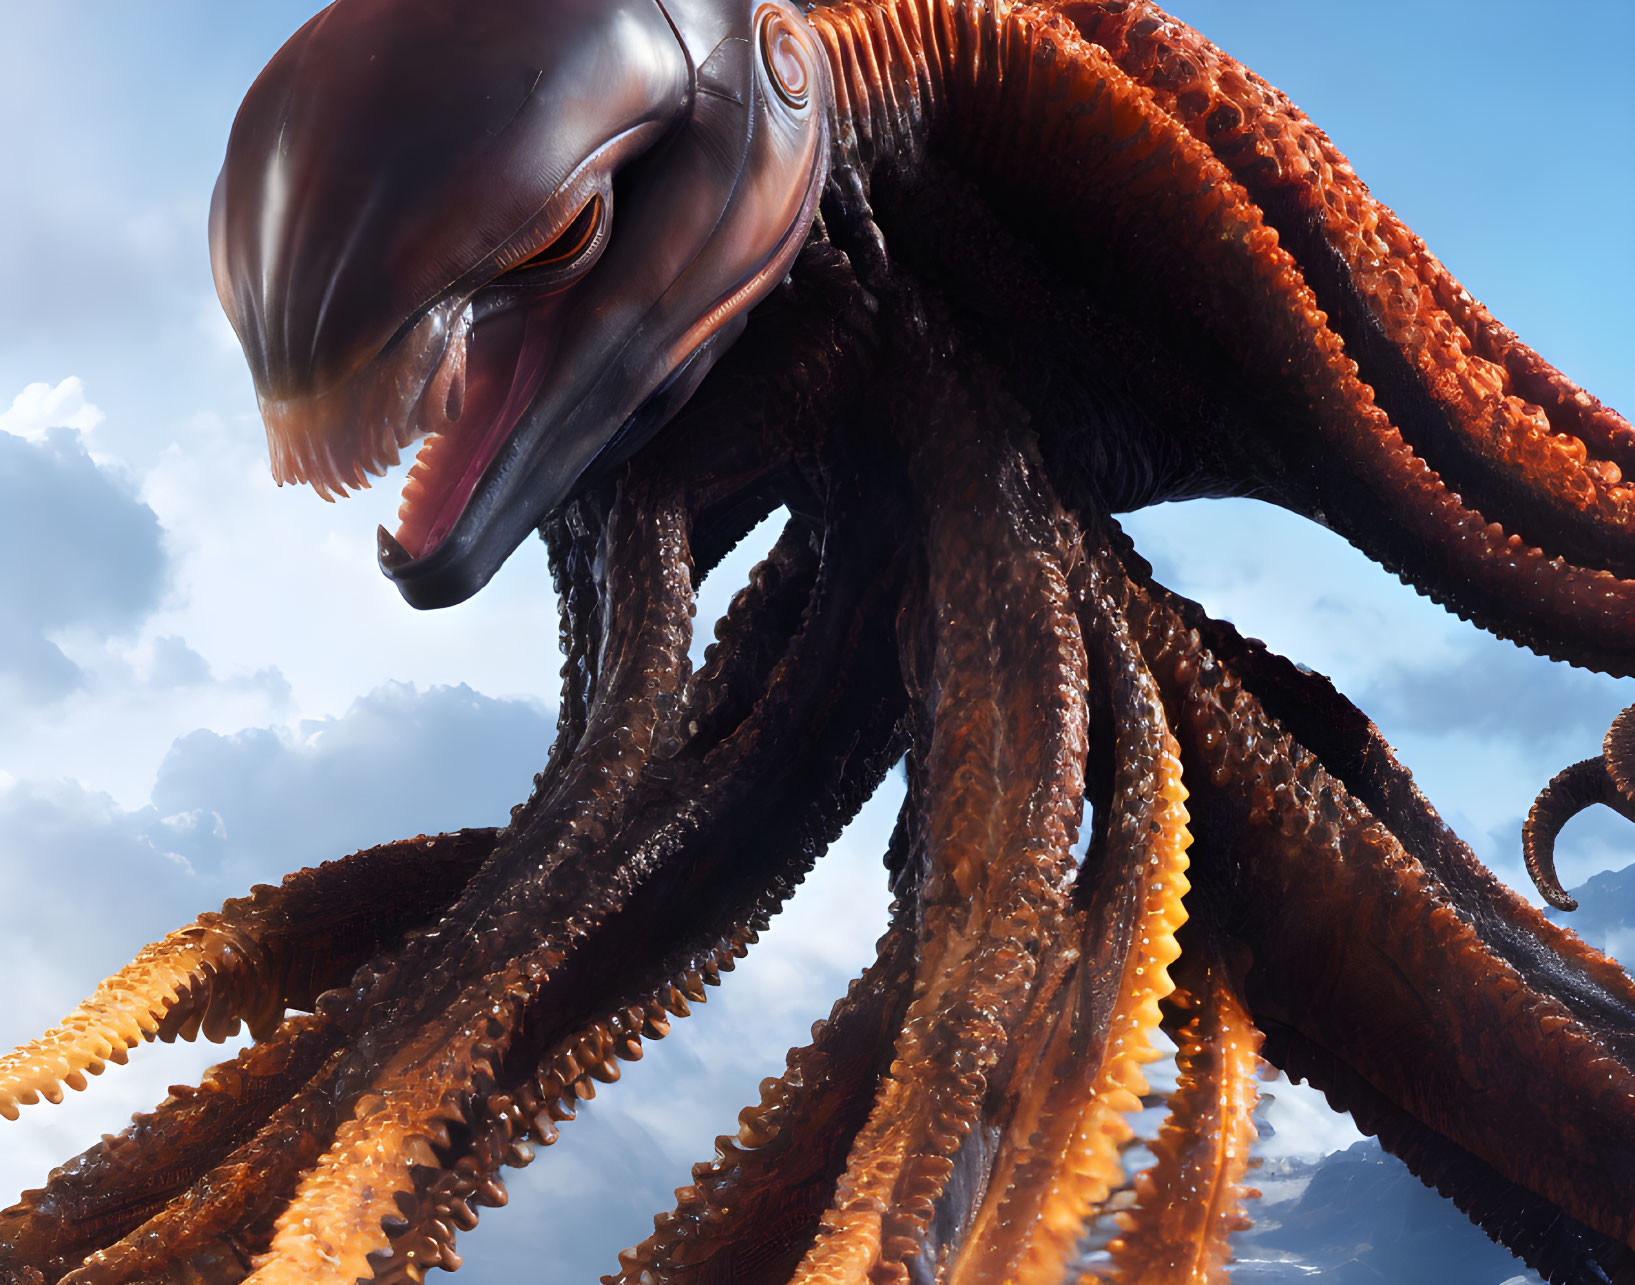 Sleek helmeted octopus creature with multiple tentacles on cloudy sky background